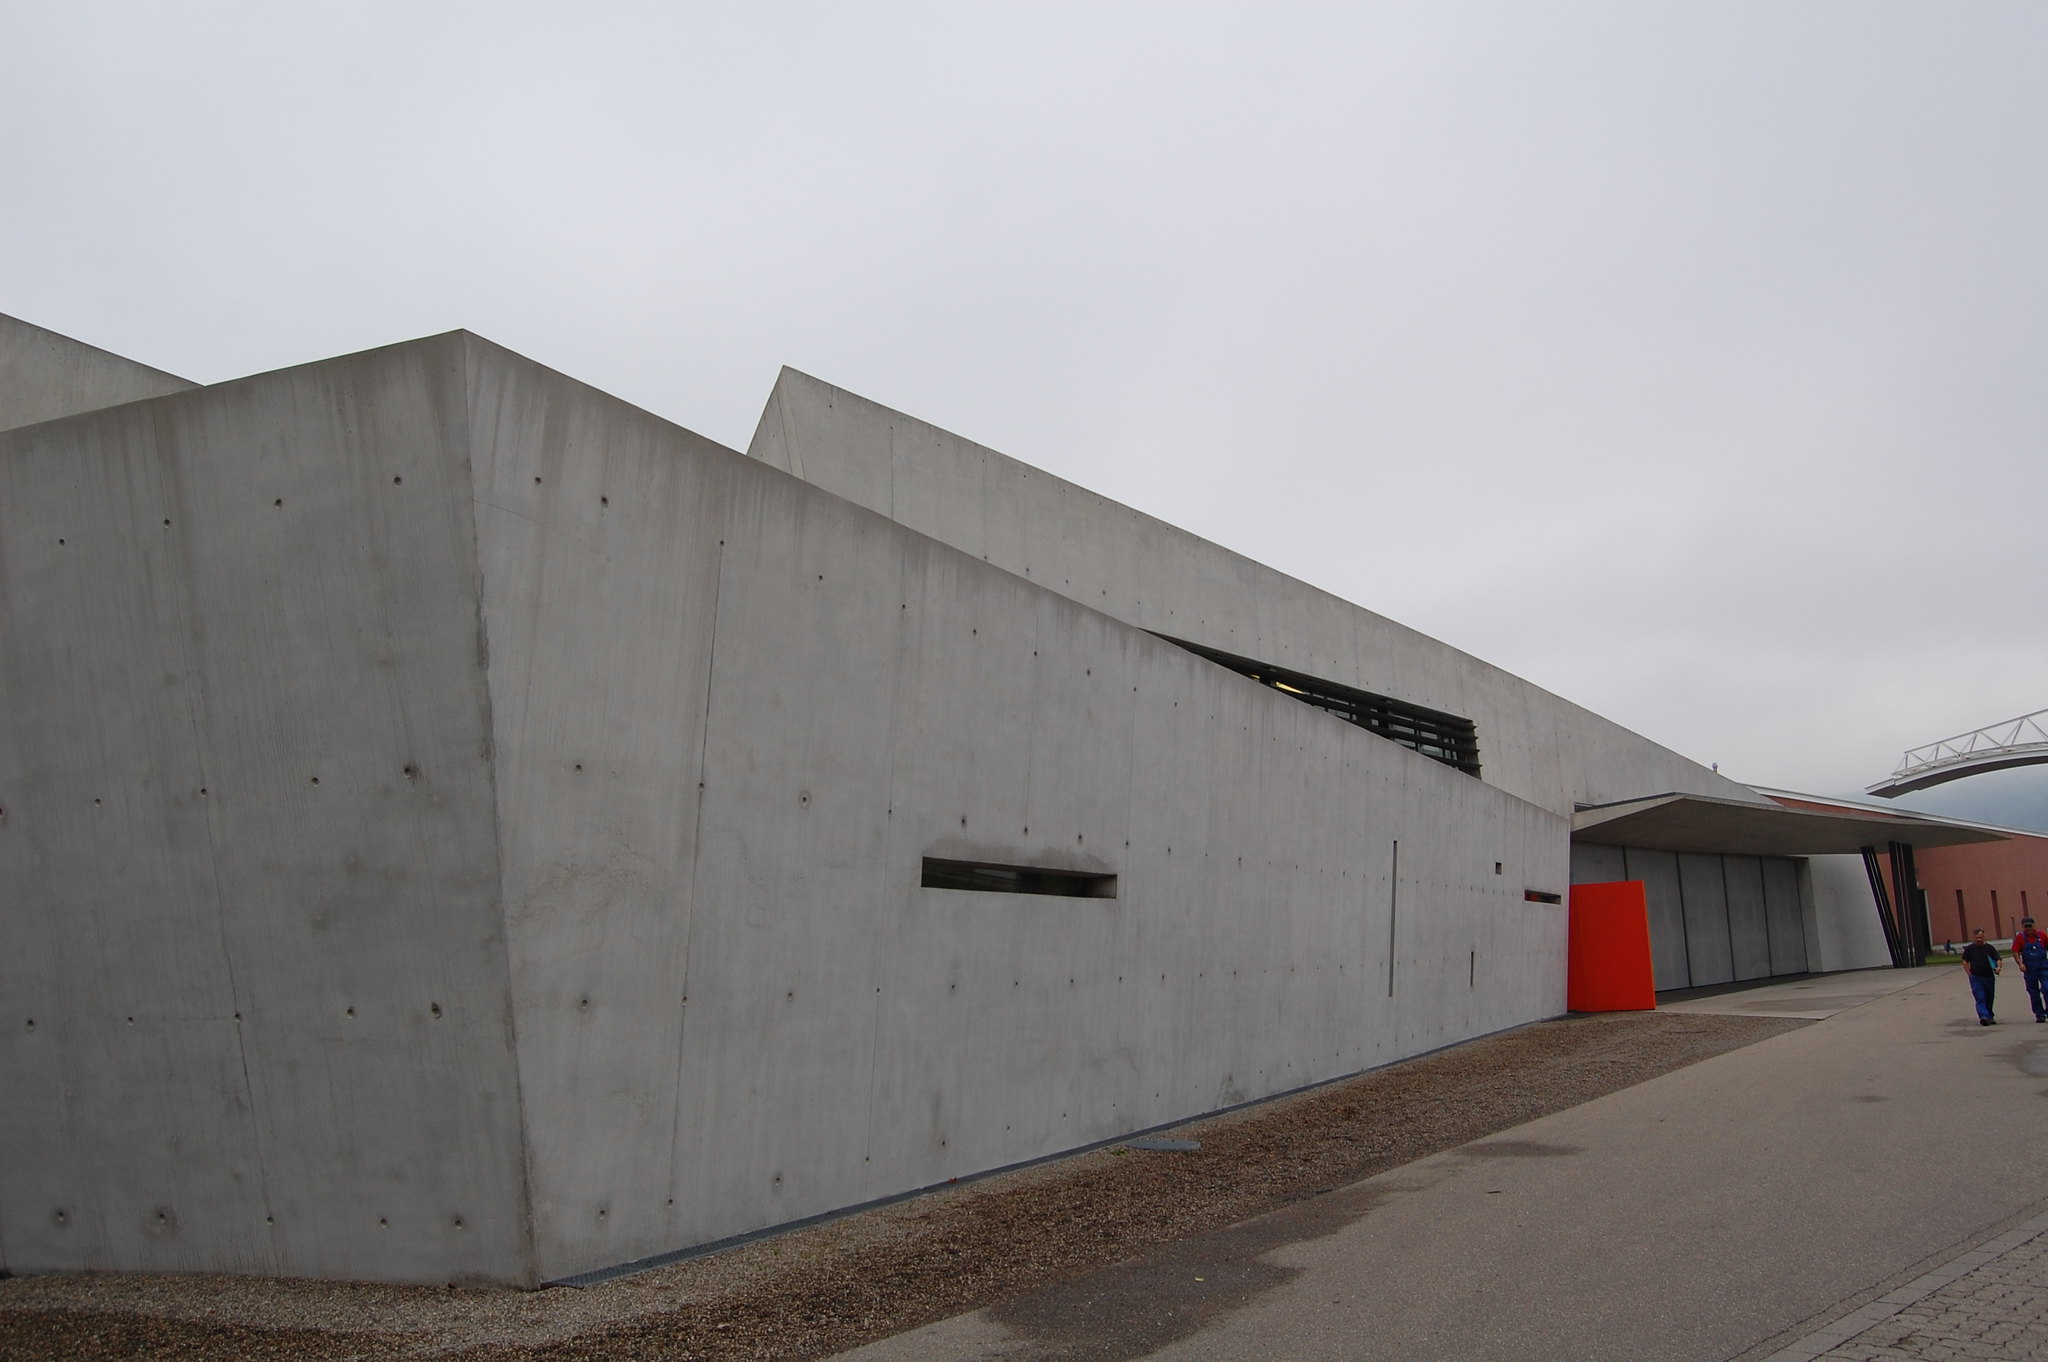 Vitra Fire Station Zaha Hadid S First Project The Arch Insider